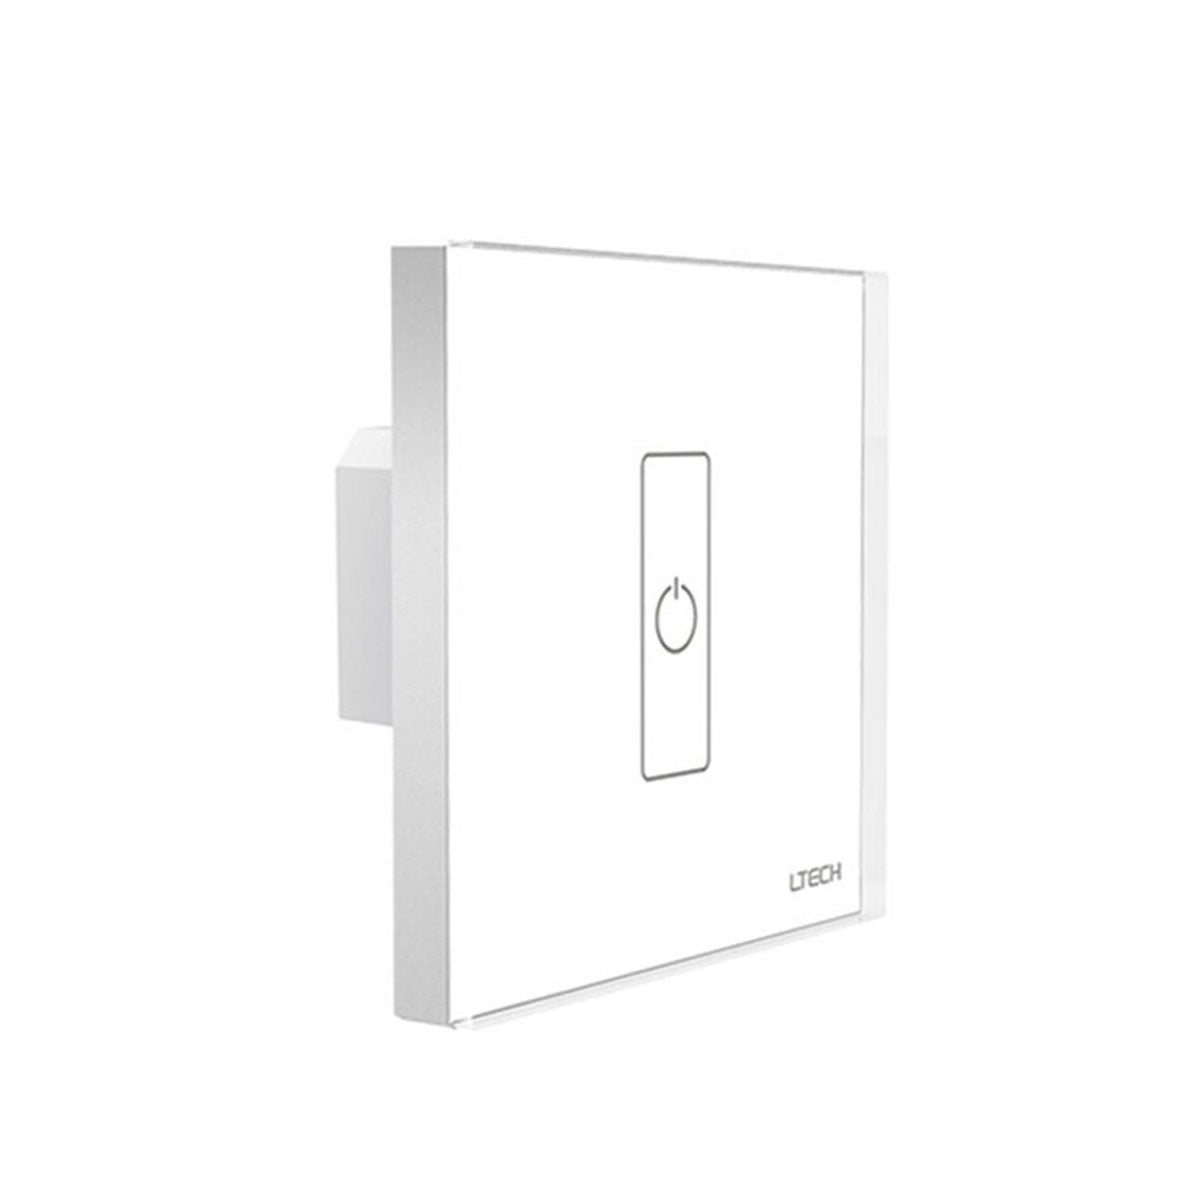 Ltech EDA1 1 Switch Touch Panel - DALI Master Dimmer